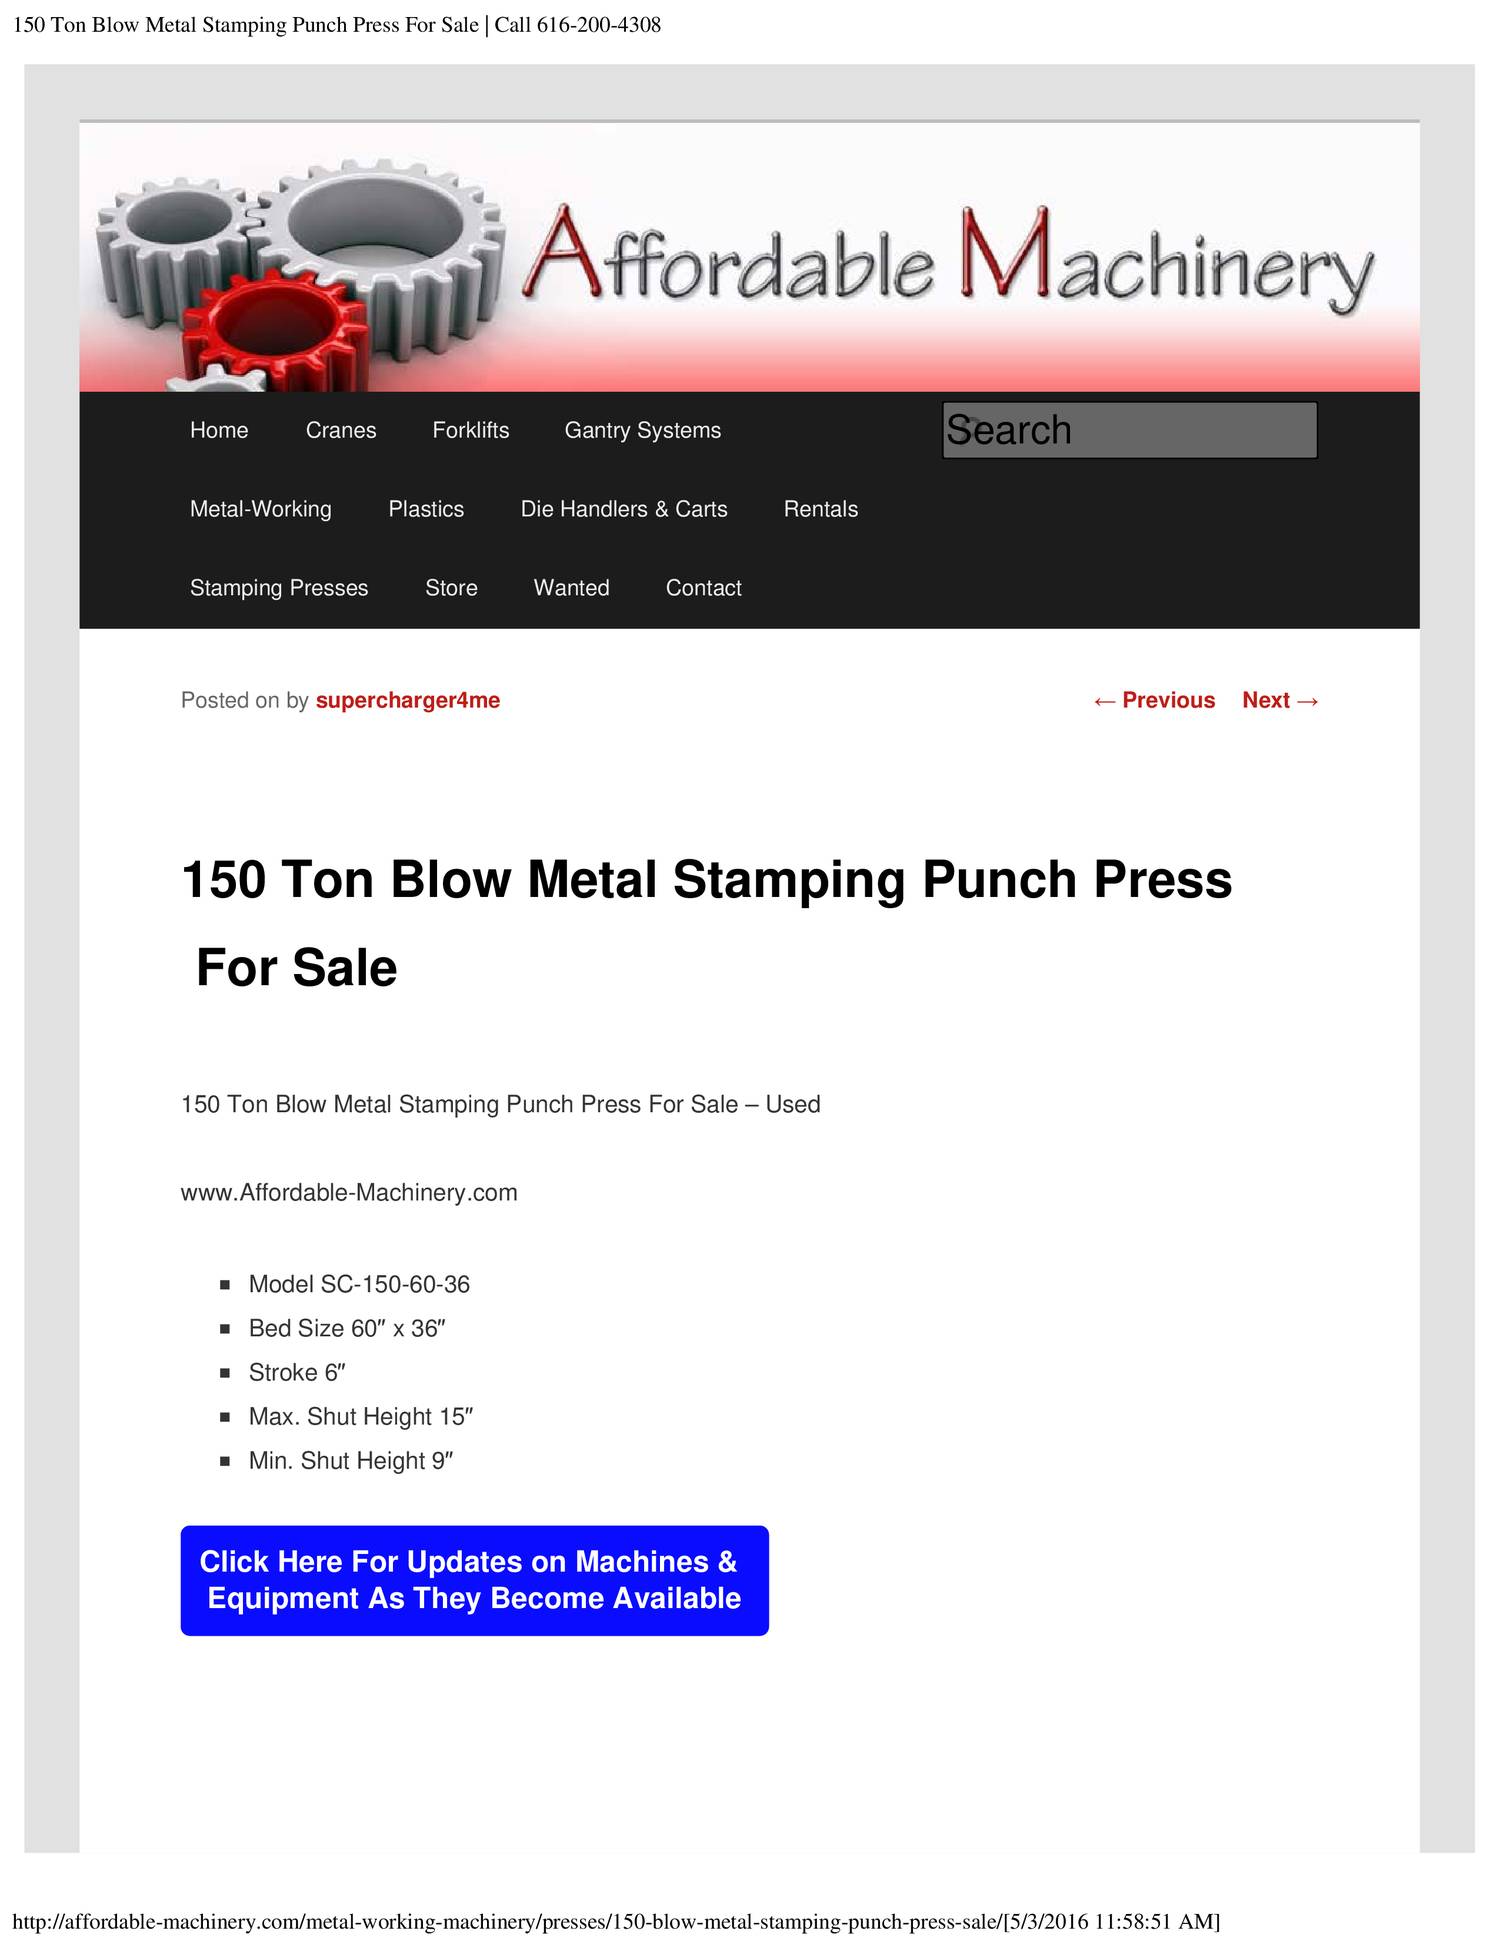 150 Ton Blow Metal Punch Press For Sale _ Call 616-200-4308.pdf | DocDroid